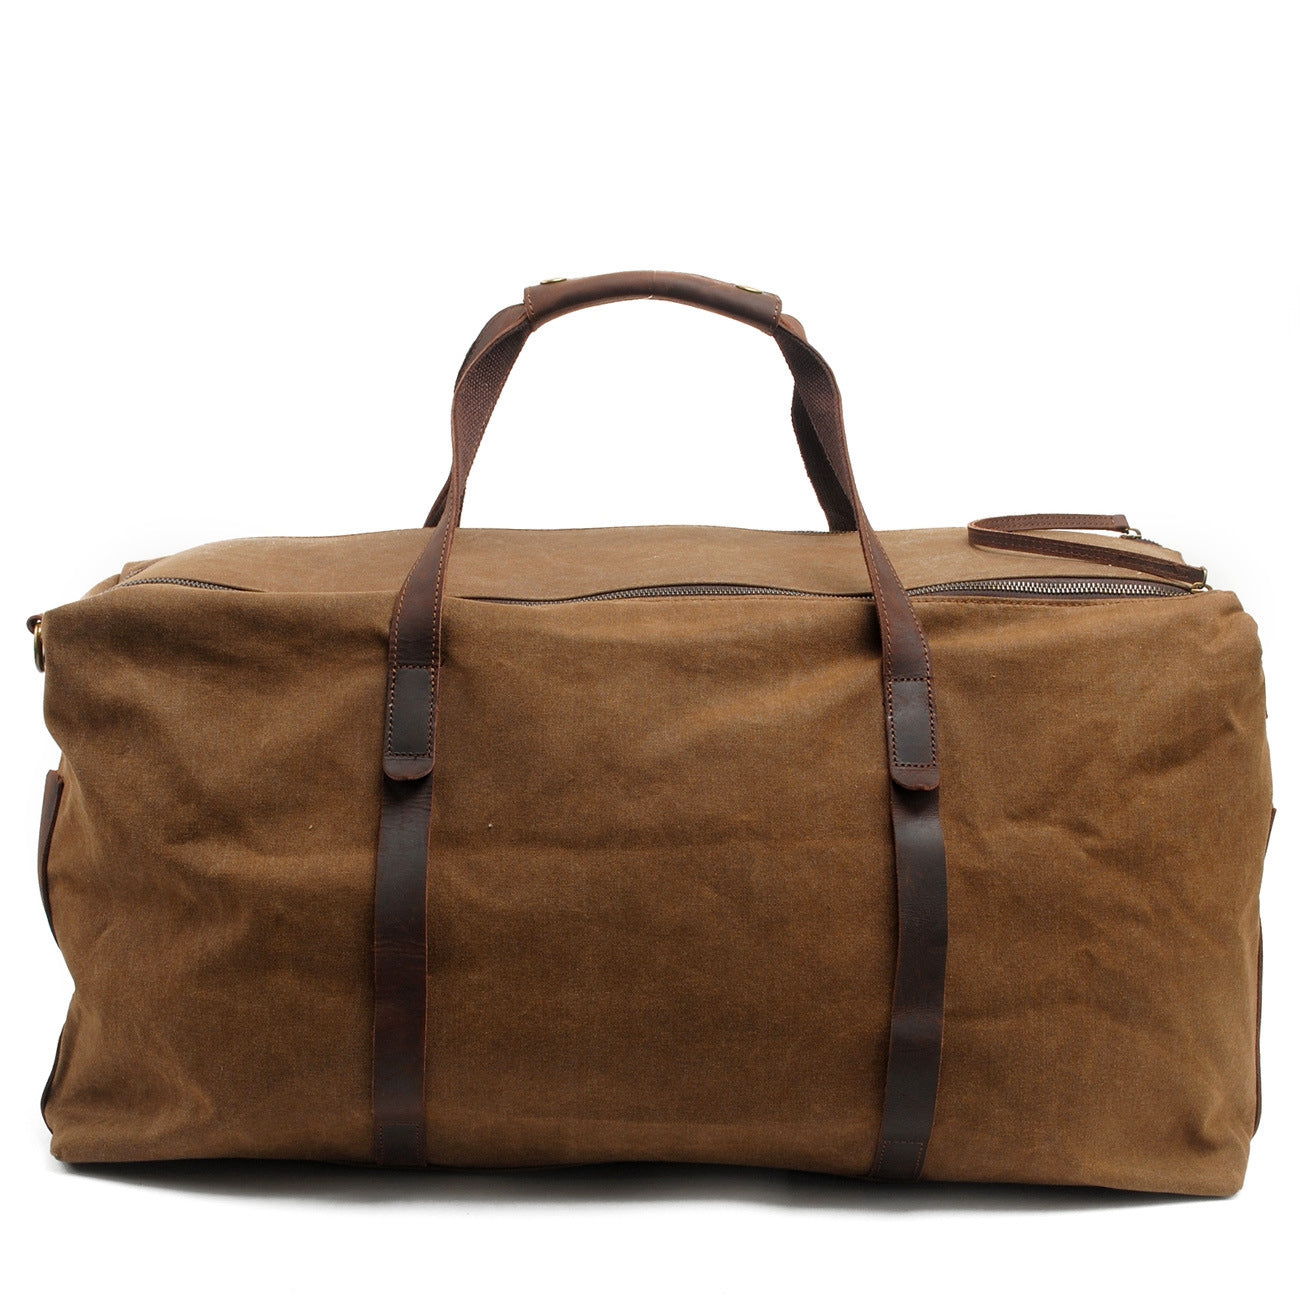 best place to buy duffel bags